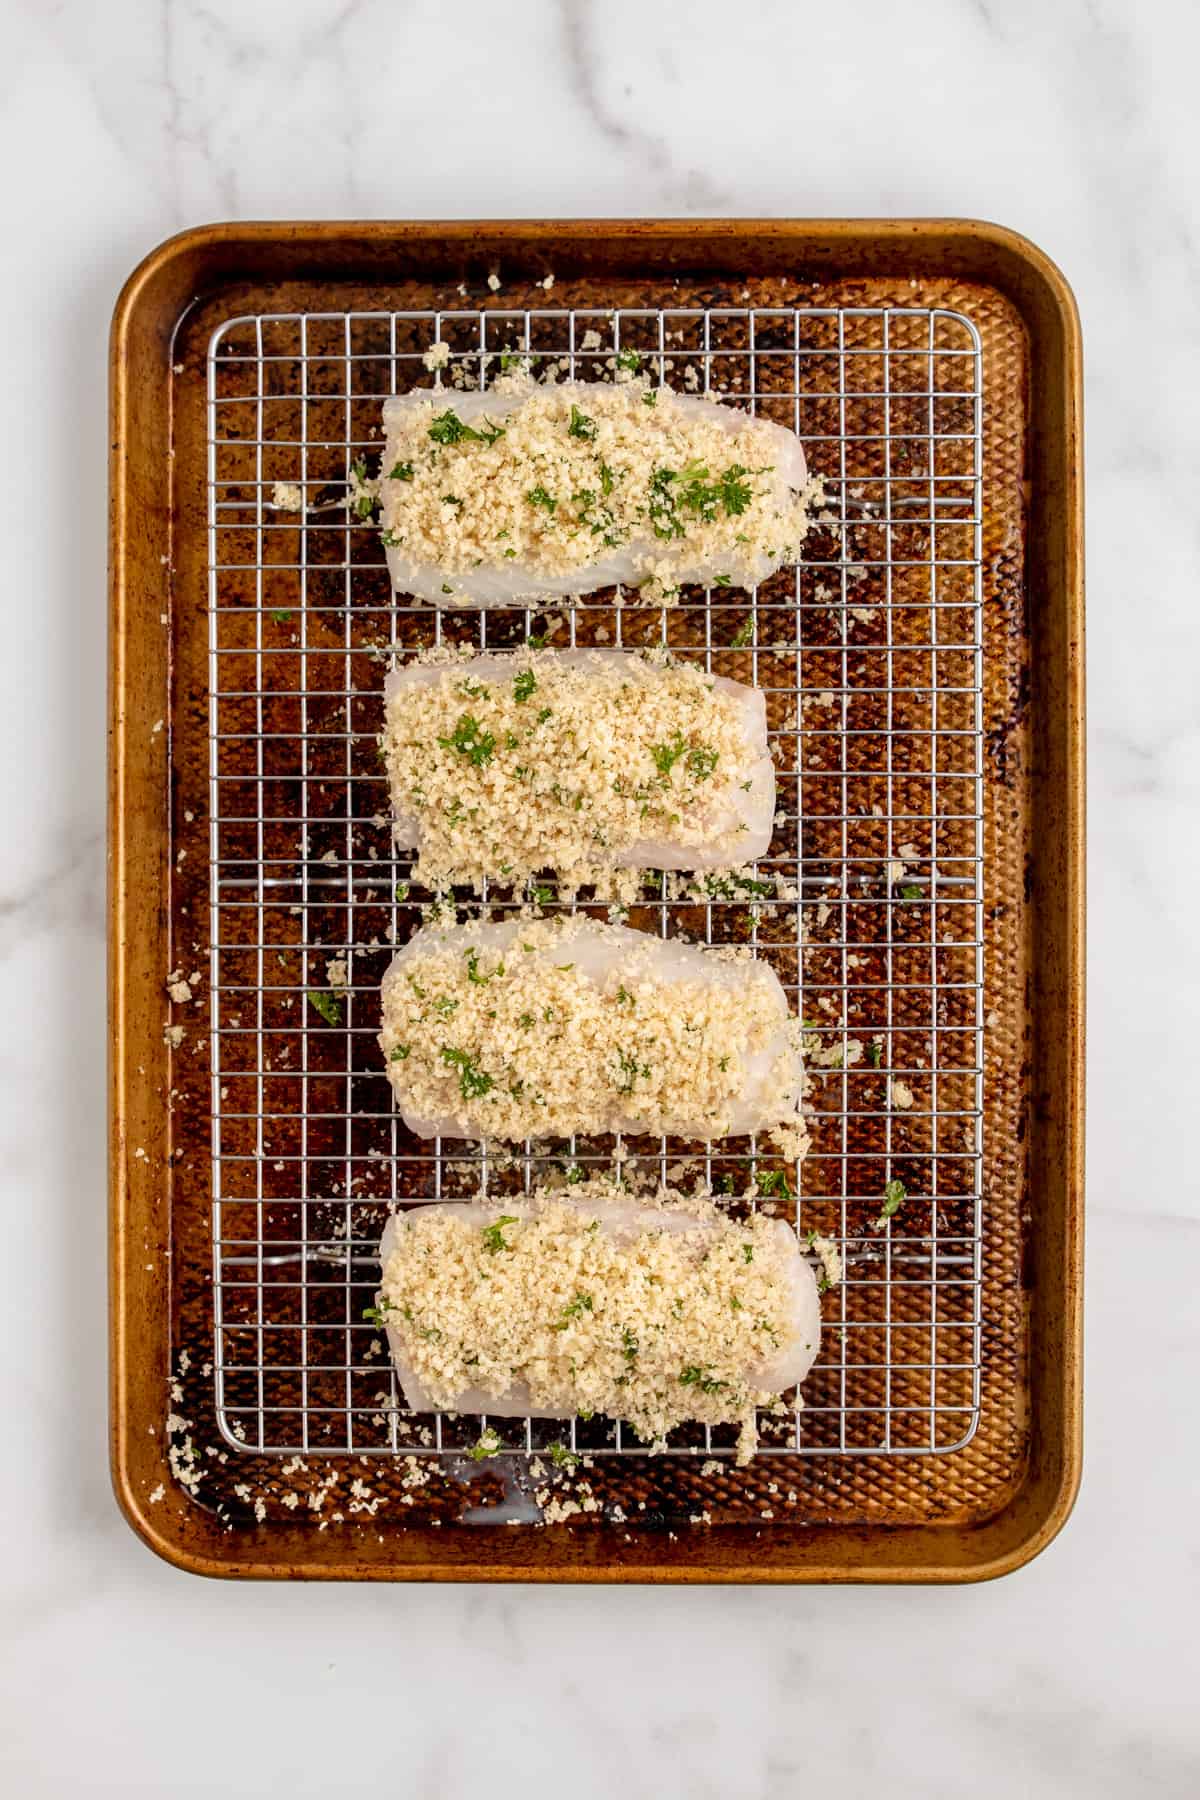 Raw cod fillets coated with panko breadcrumbs on a baking sheet.